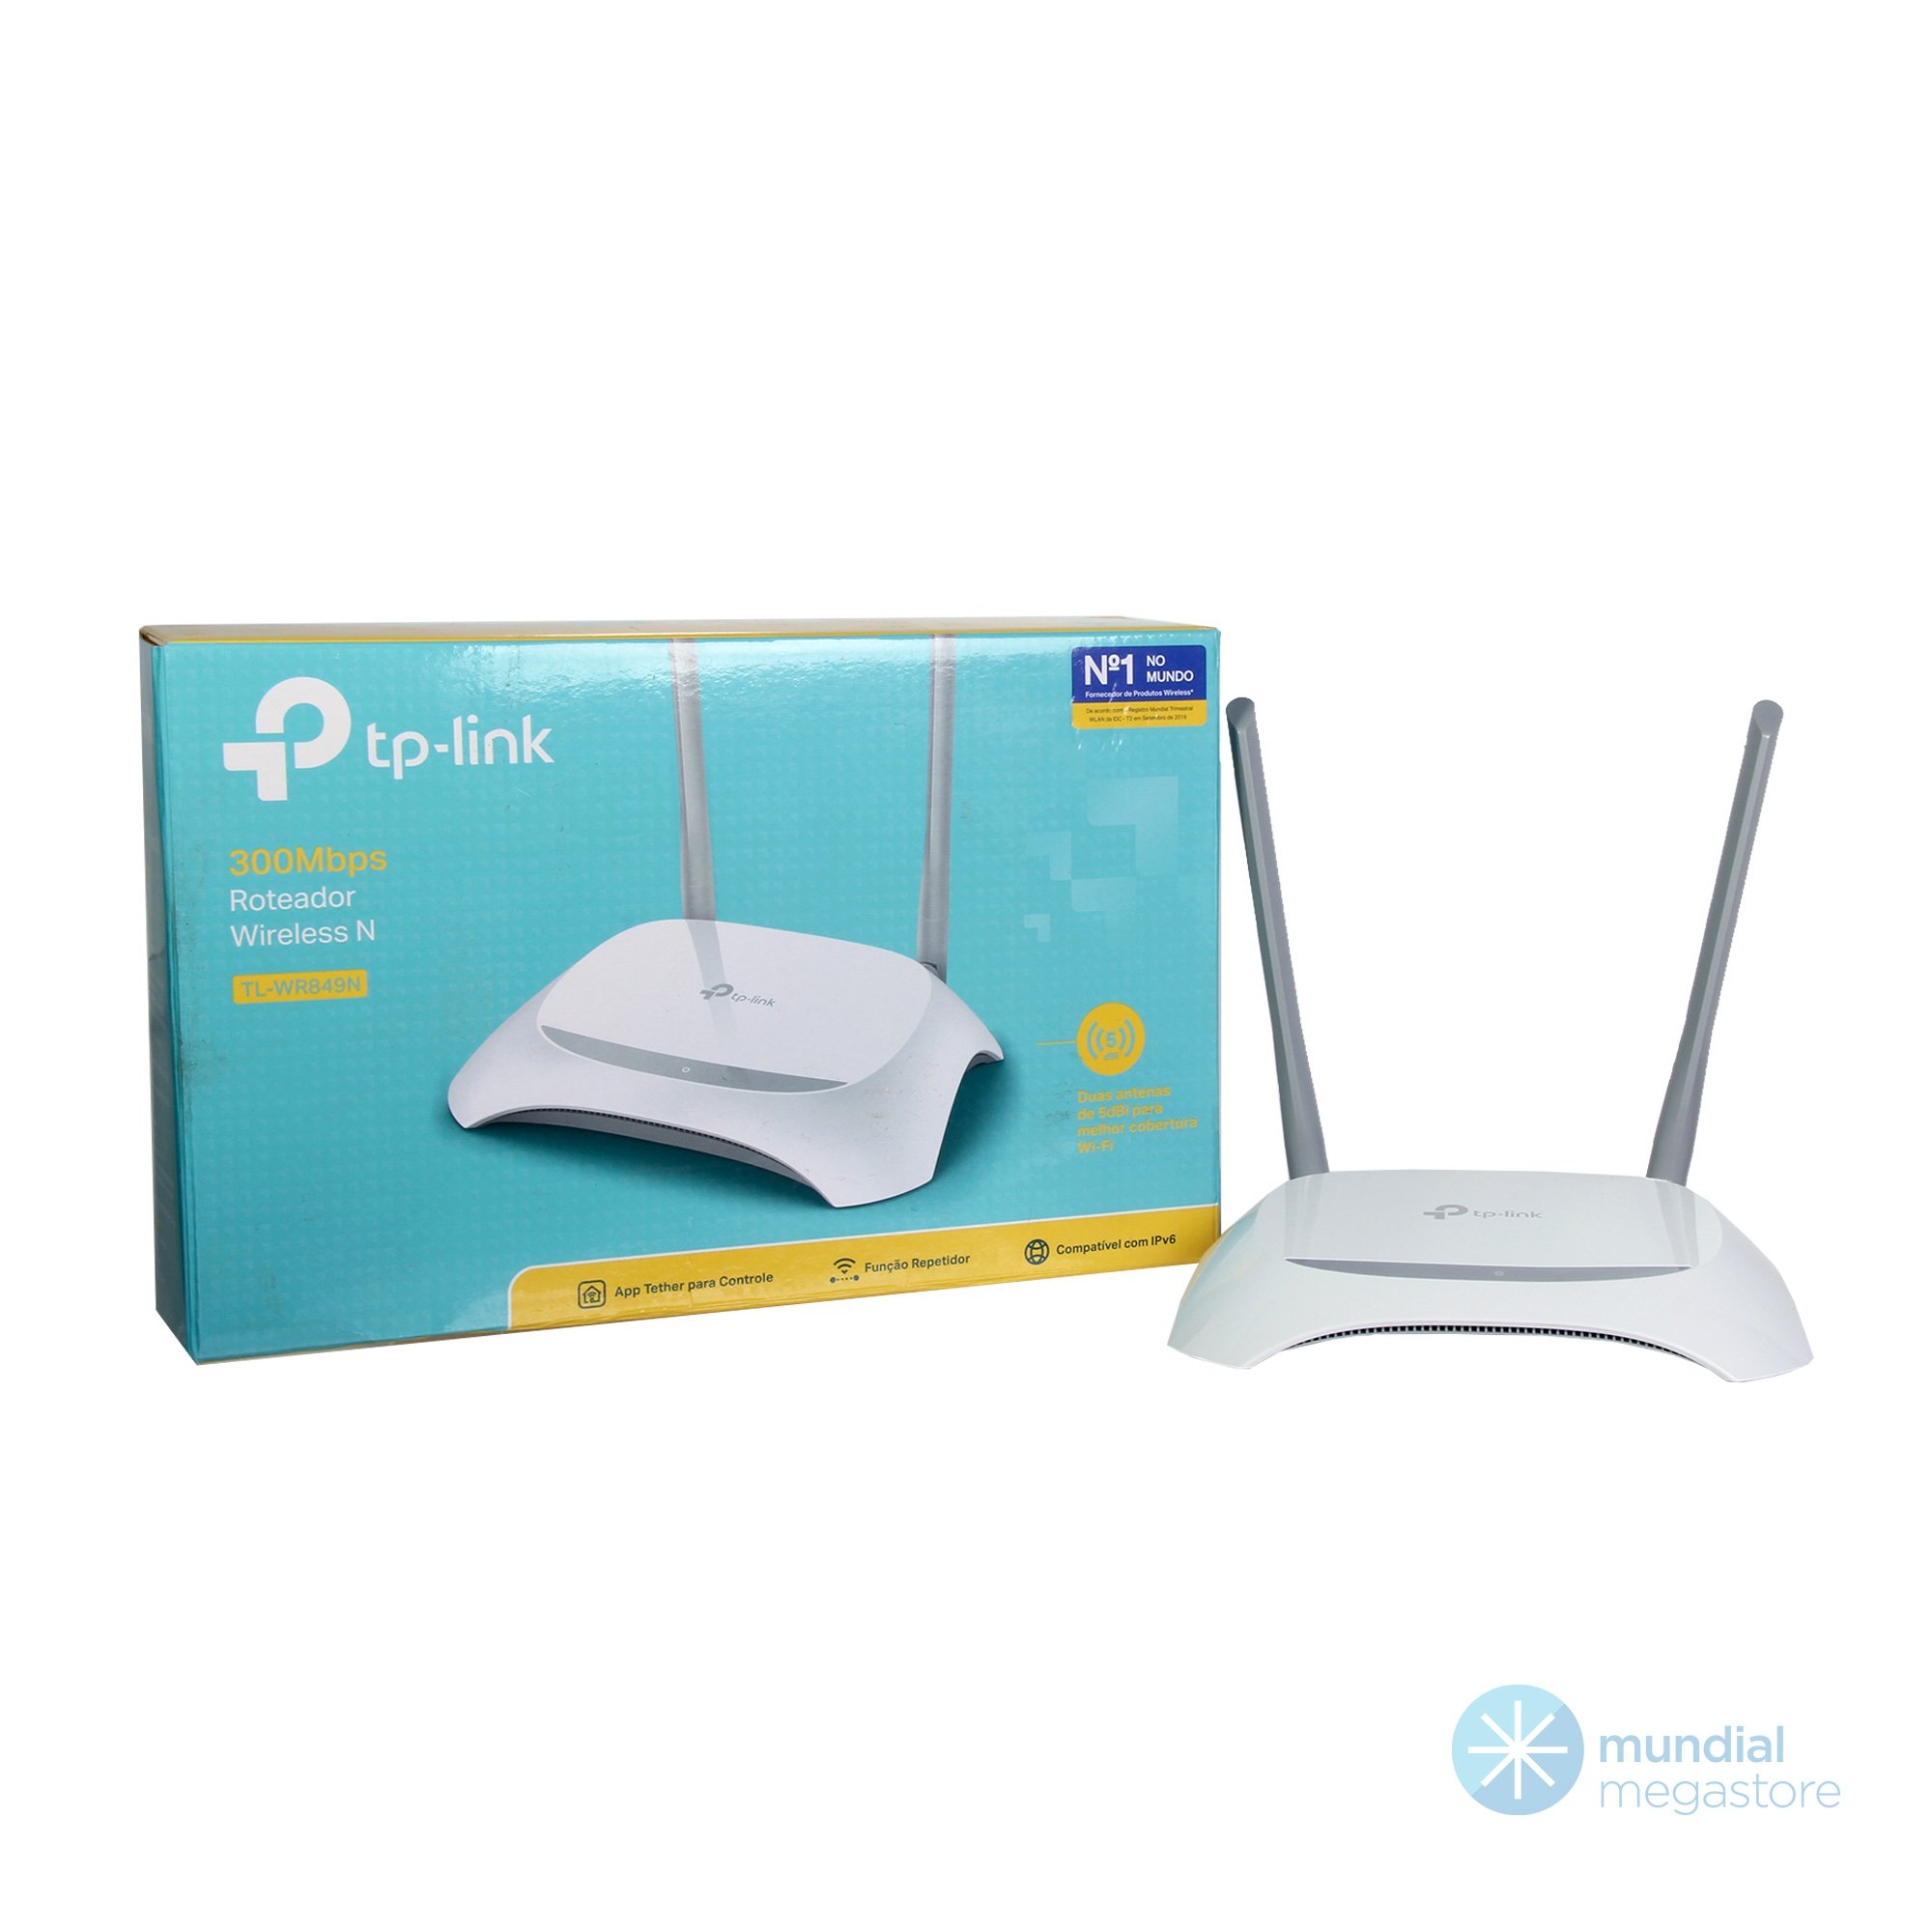 wireless roteador tp link wr849n 300mbps 2 antenas 45885 2000 195982